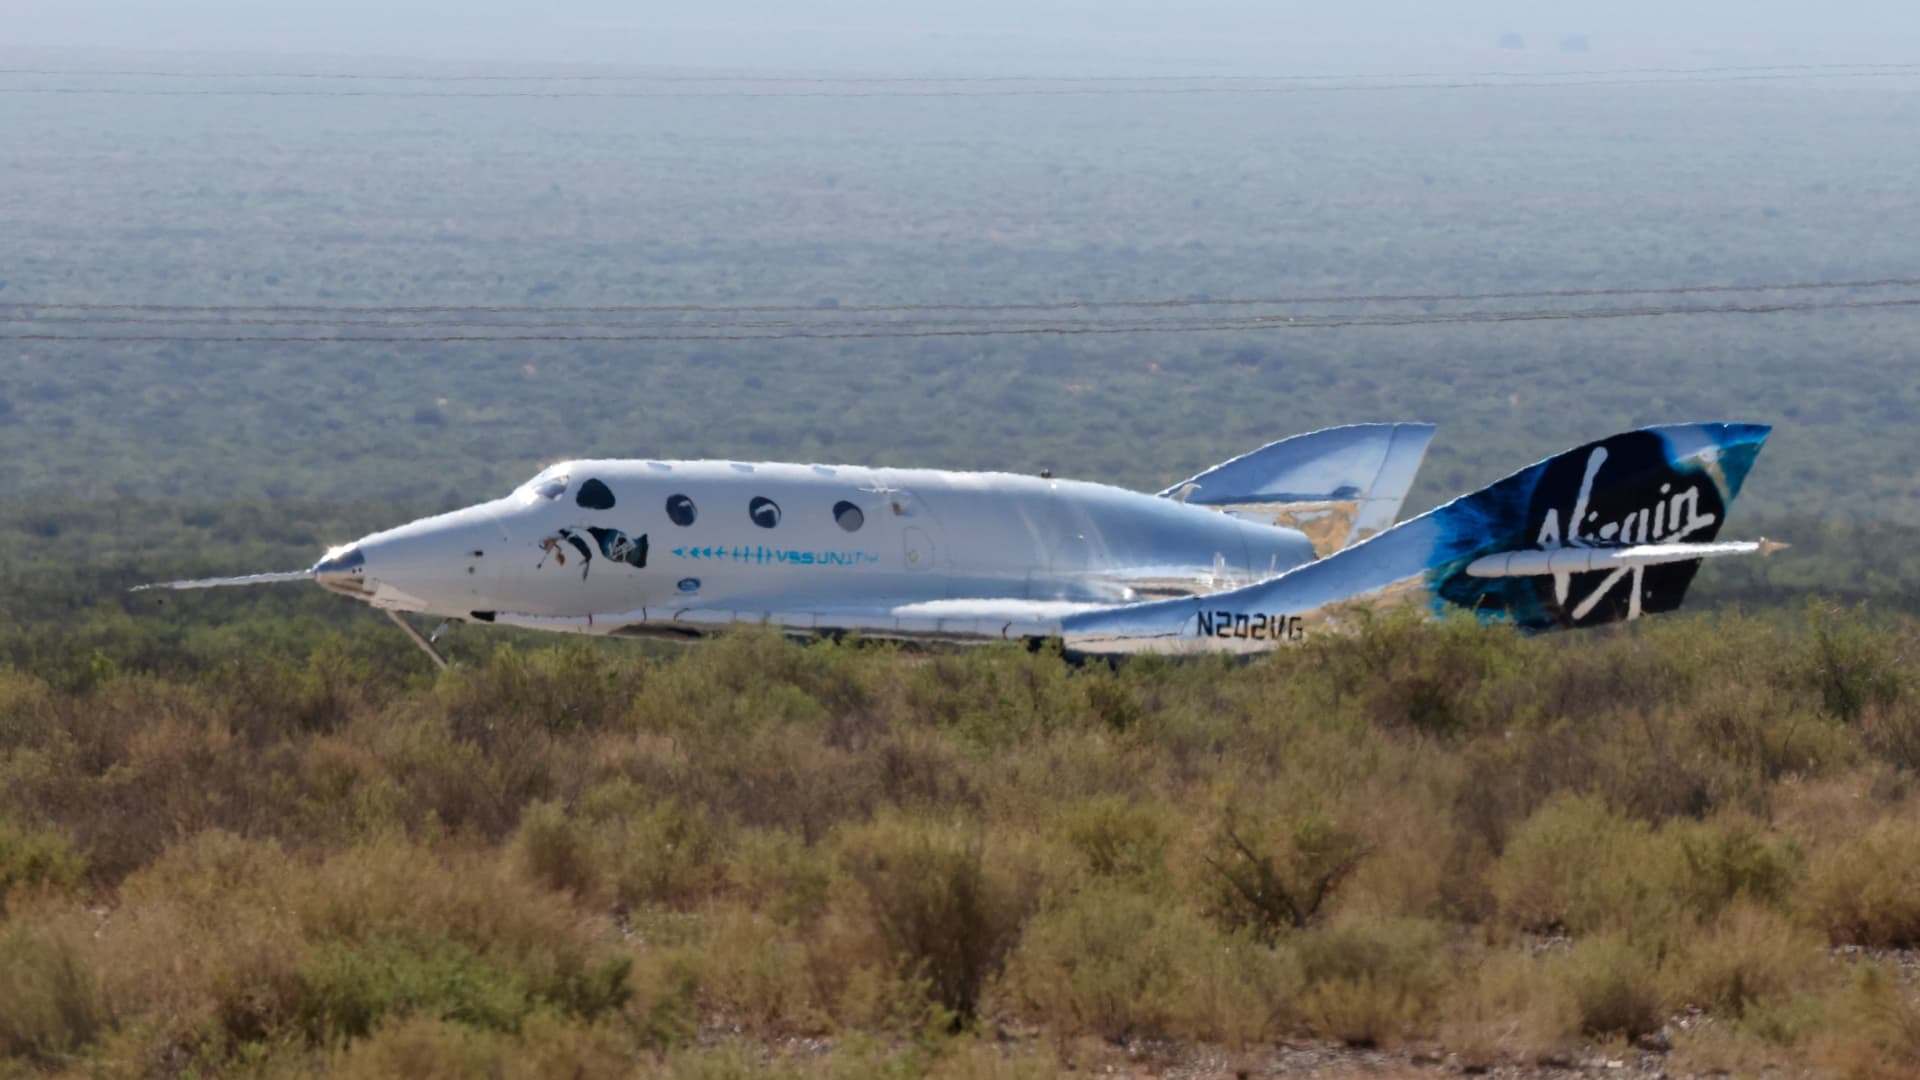 Virgin Galactic's passenger rocket plane VSS Unity, carrying billionaire entrepreneur Richard Branson and his crew, lands after reaching the edge of space above Spaceport America near Truth or Consequences, New Mexico, U.S., July 11, 2021.